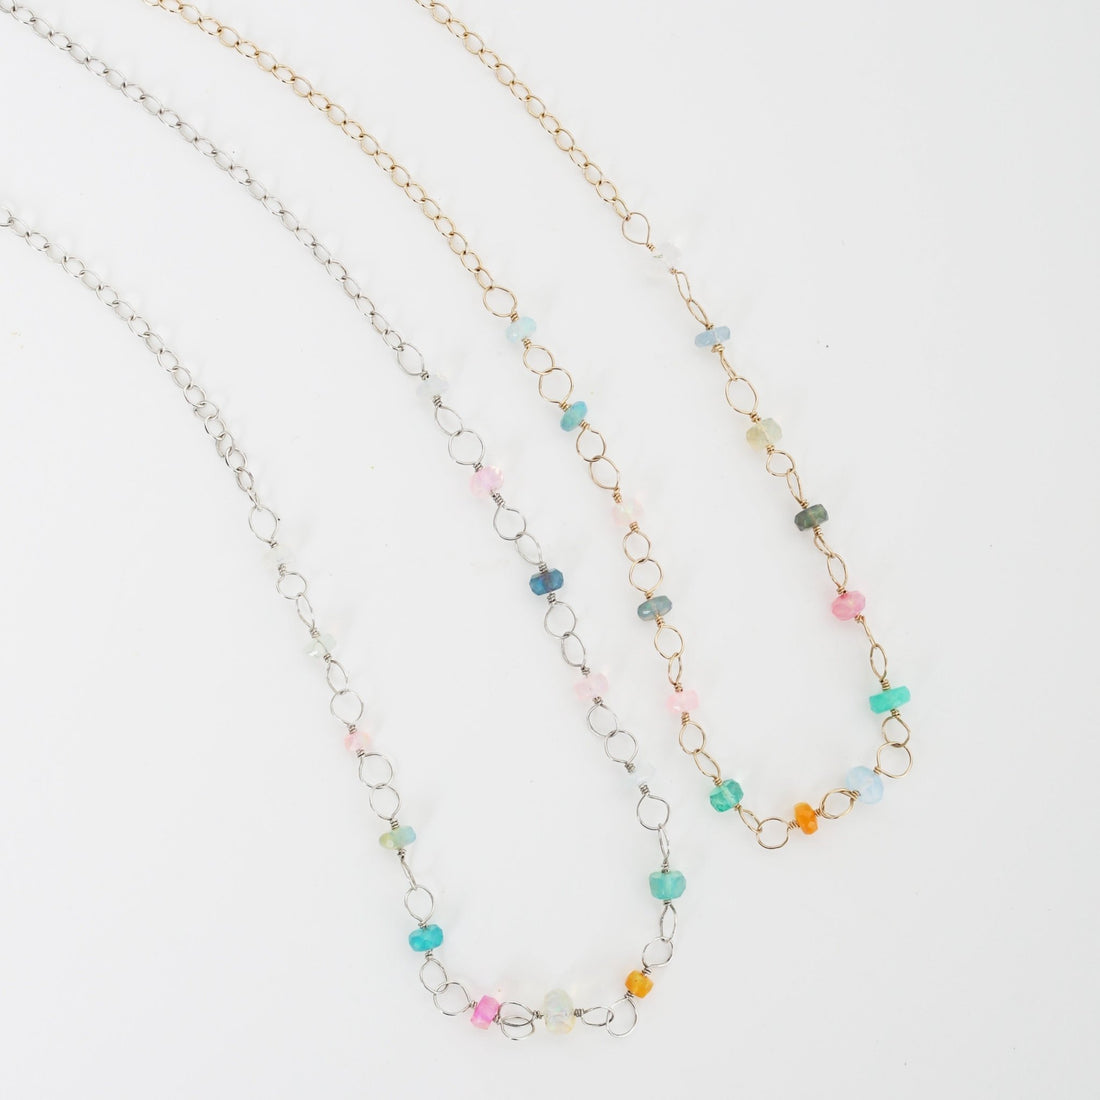 Funfetti Opal Chain Necklace - Chocolate and Steel